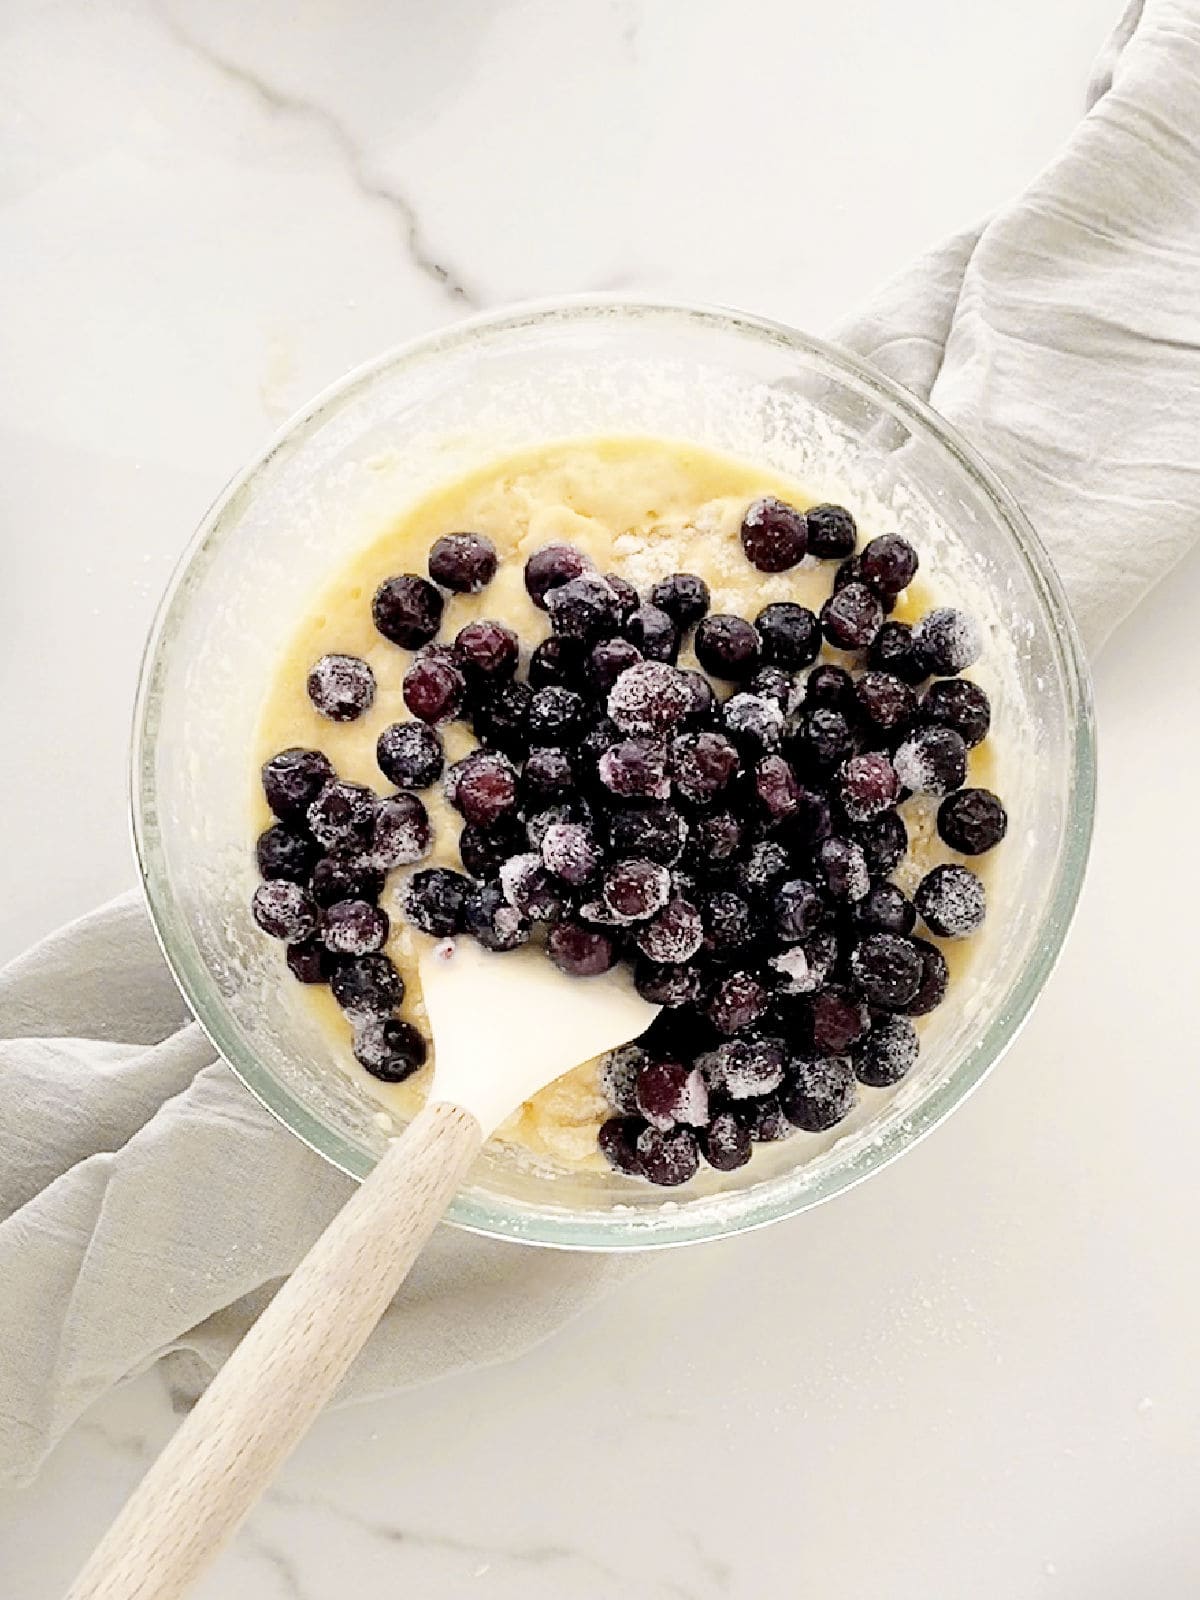 Blueberries added to muffin batter in a glass bowl with a spatula. White marble surface with light grey cloth.